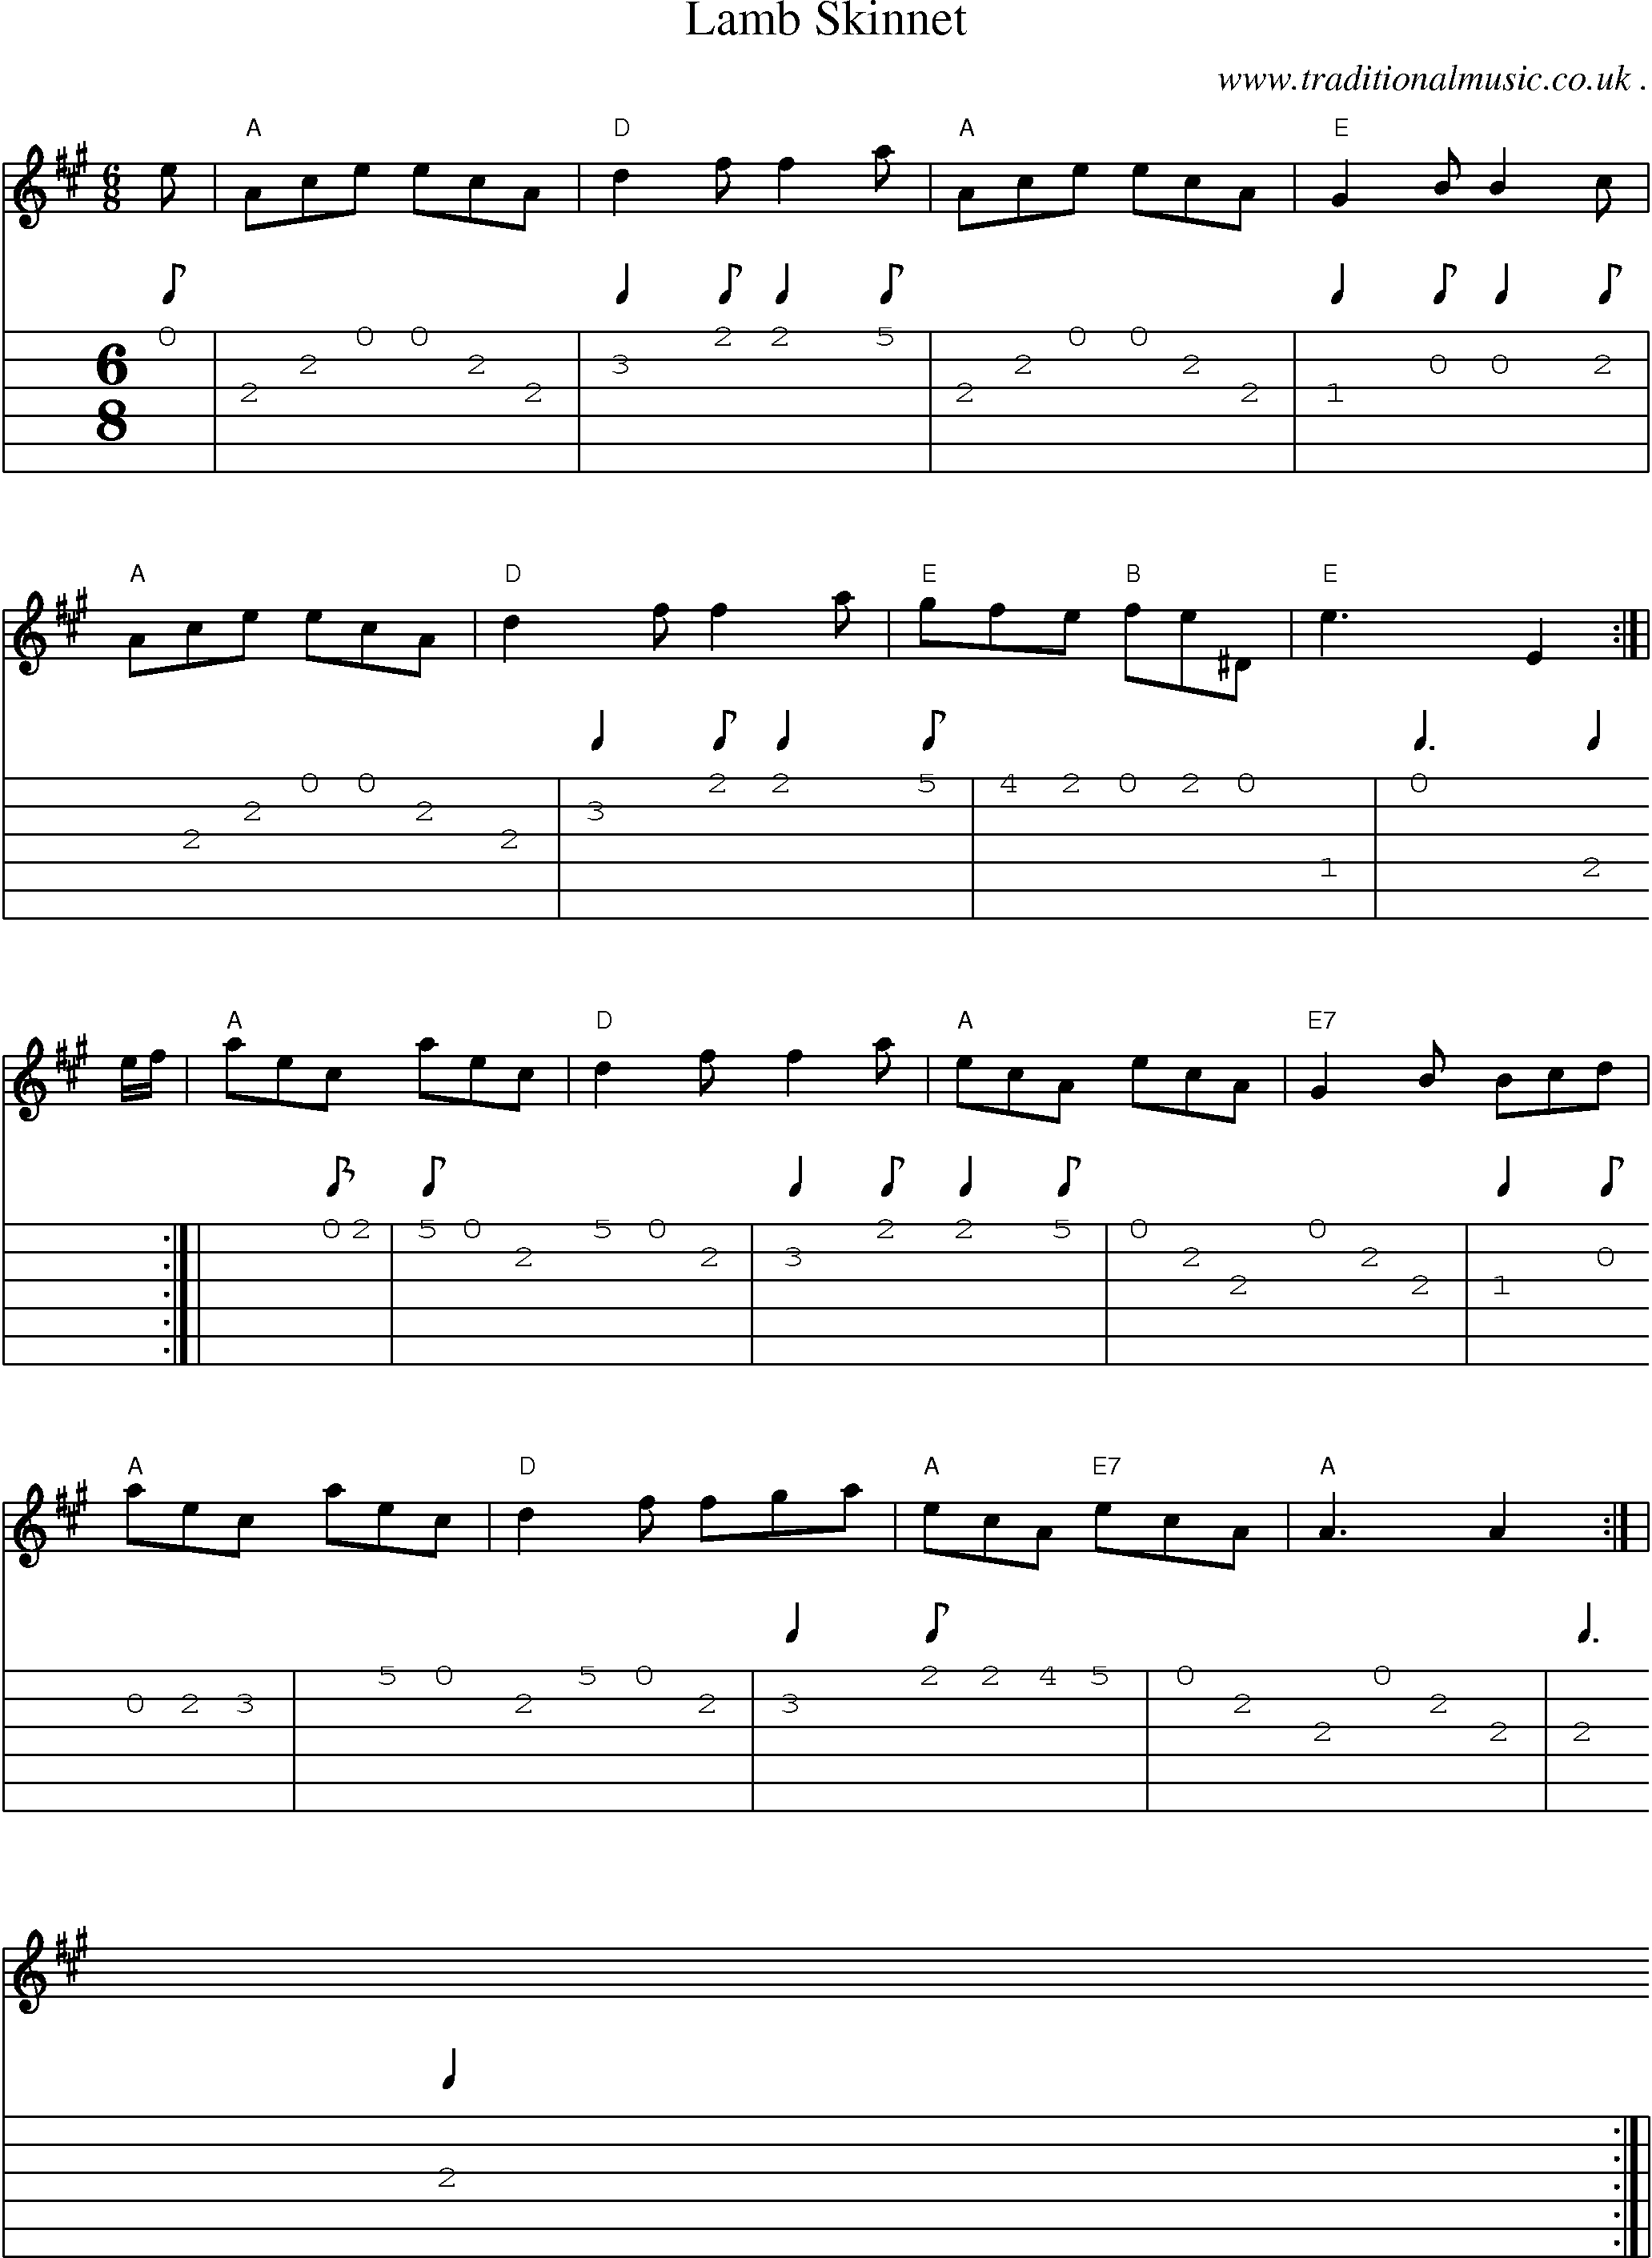 Sheet-music  score, Chords and Guitar Tabs for Lamb Skinnet